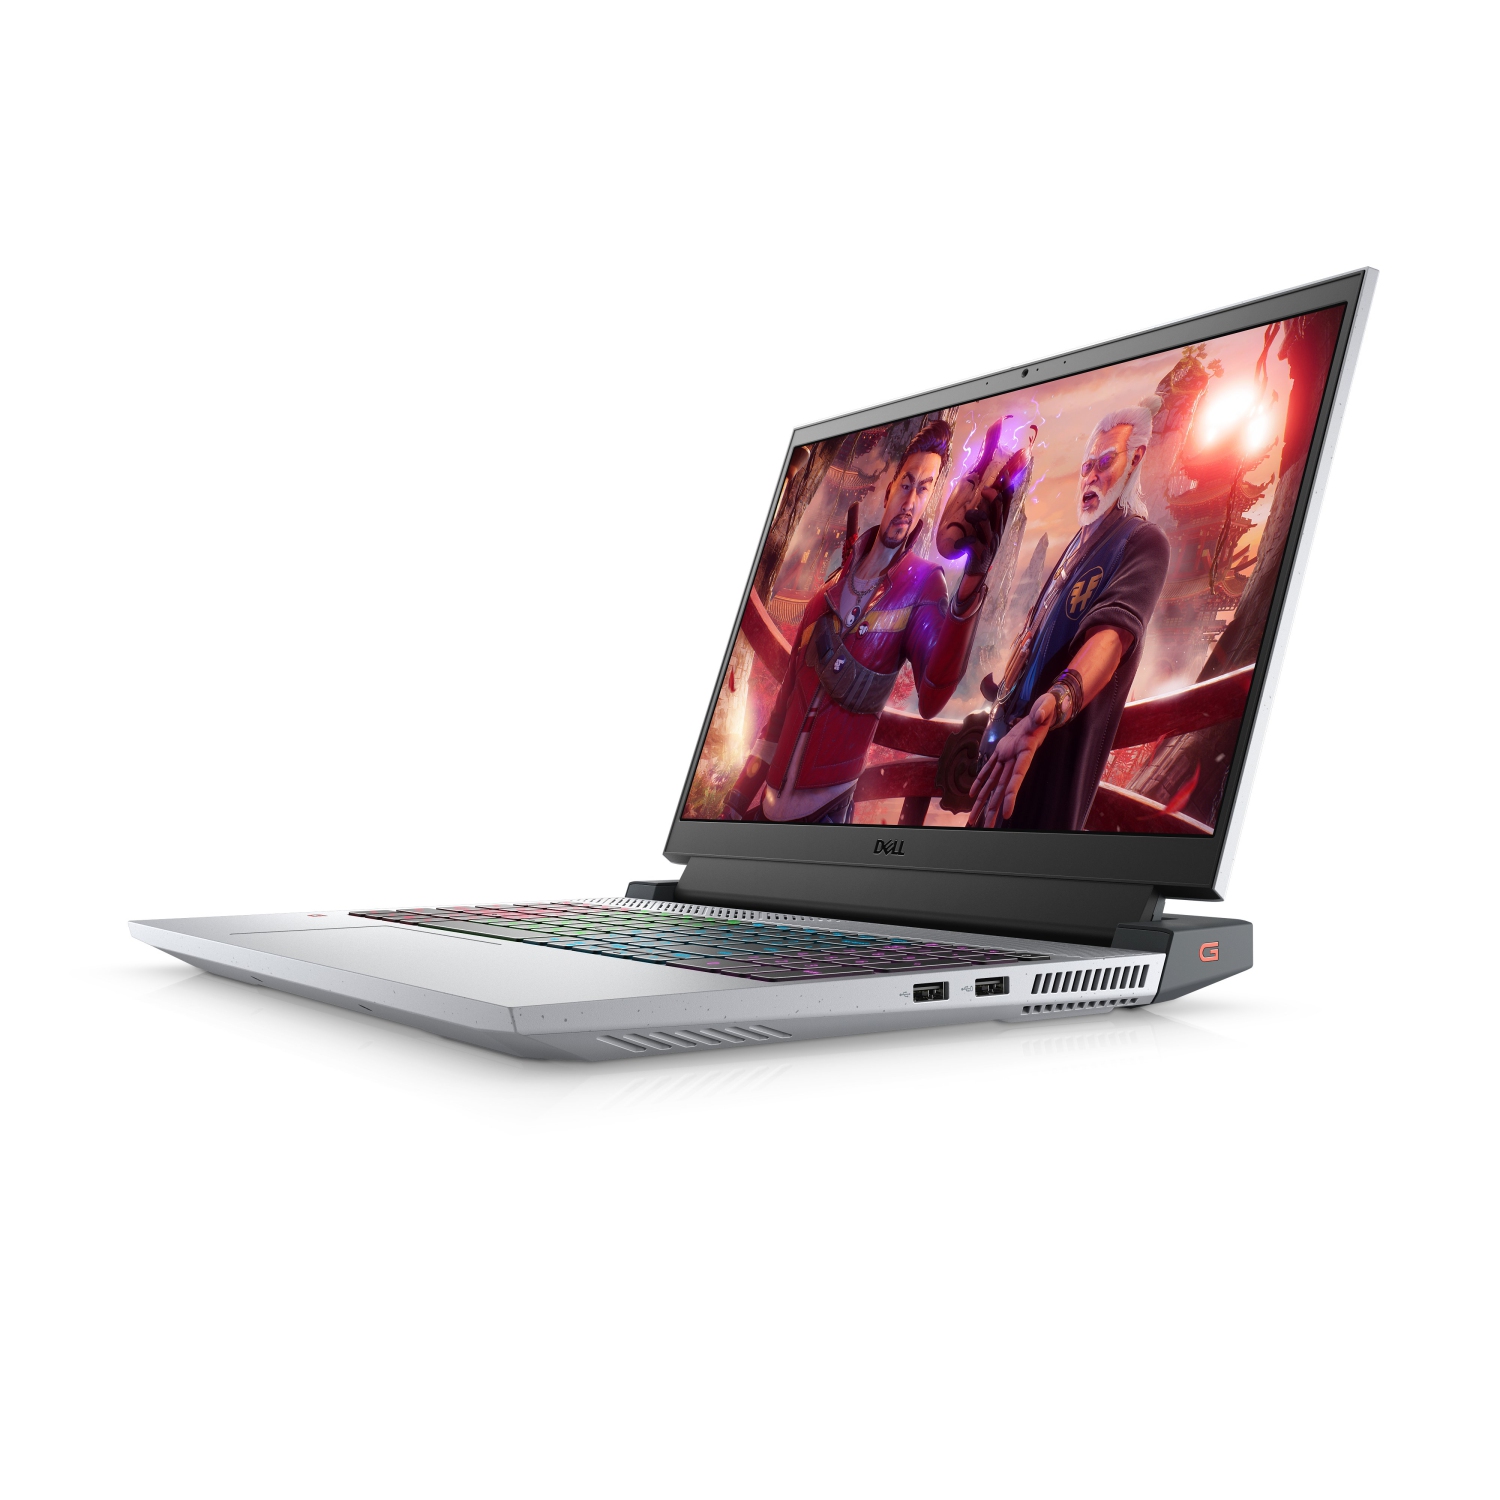 Refurbished (Excellent) - Dell G15 5515 Gaming Laptop (2021) | 15.6" FHD | Core Ryzen 7 - 512GB SSD - 16GB RAM - RTX 3060 | 8 Cores @ 4.4 GHz Certified Refurbished